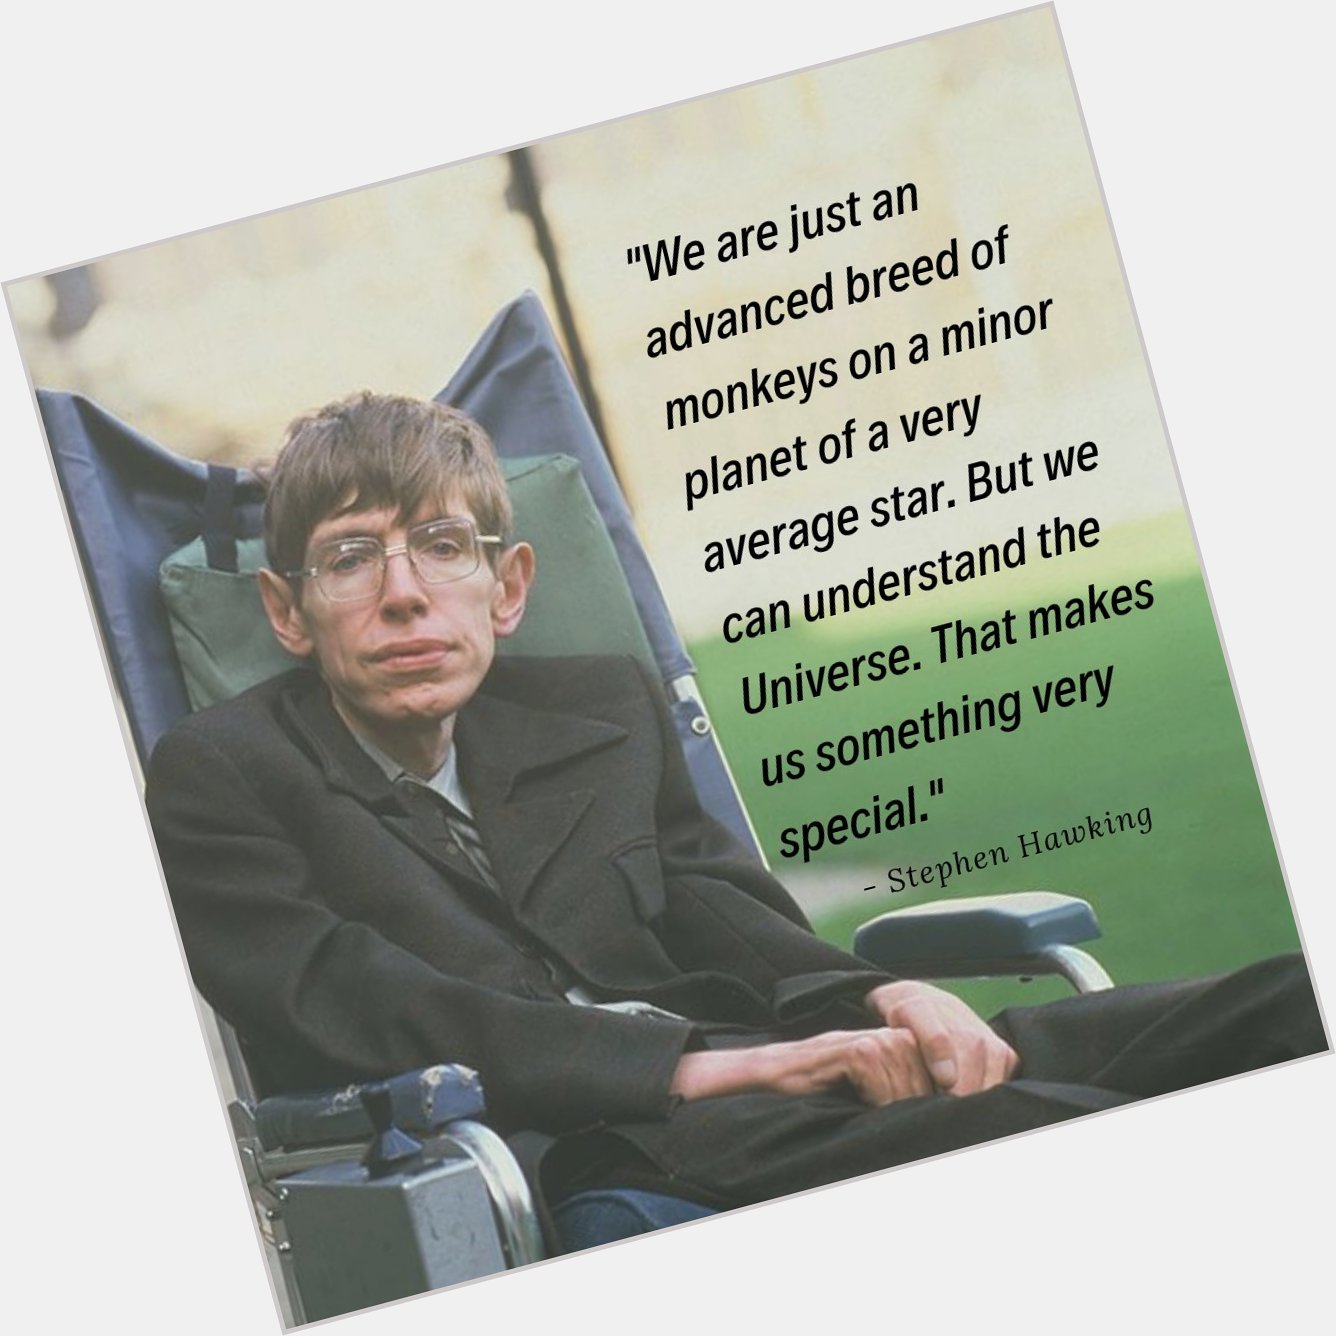 Happy Birthday to Stephen Hawking! He would have been 77 today  